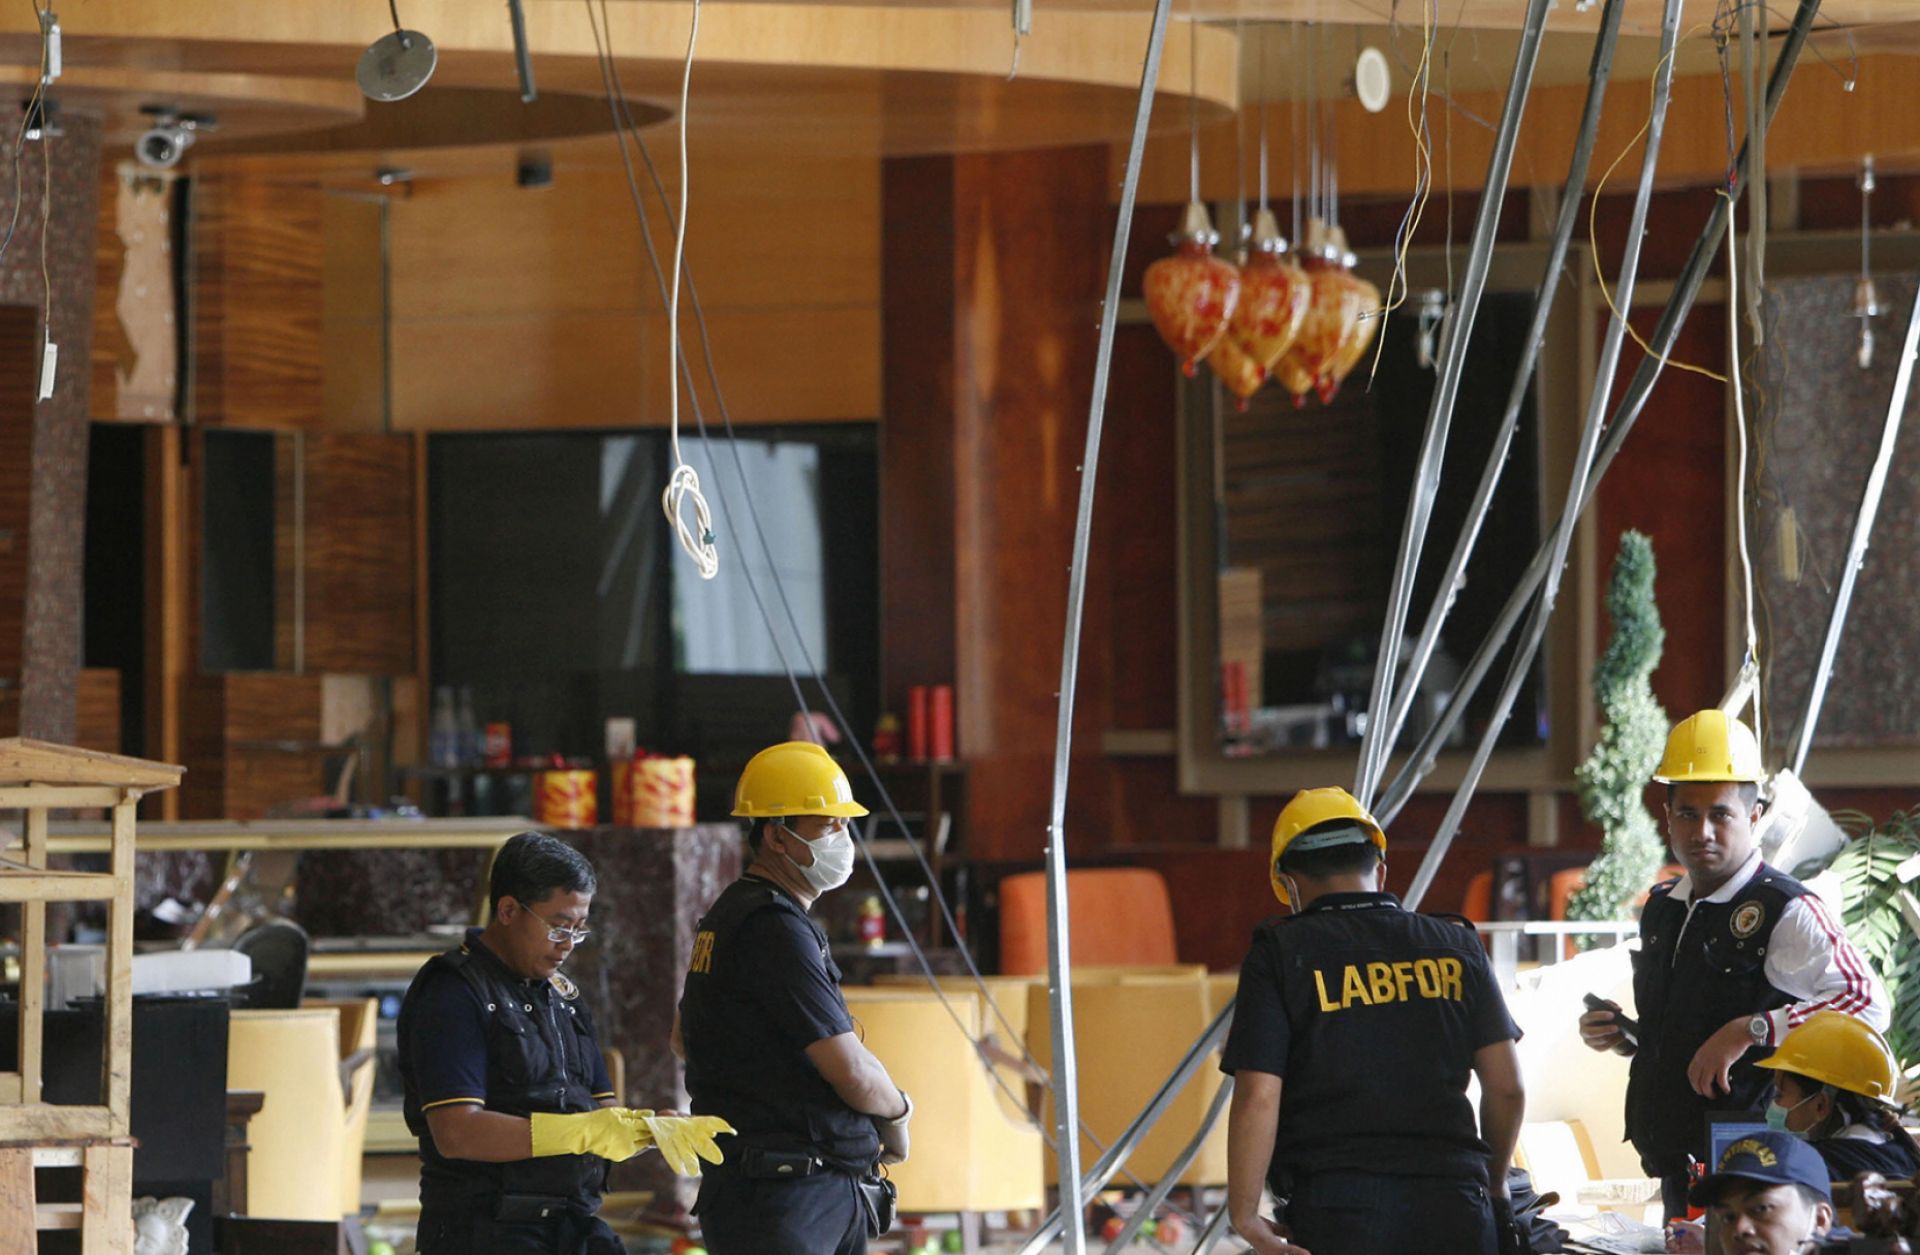 Indonesian forensic investigators scour the site of a bombing at the Ritz-Carlton hotel in Jakarta on July 18, 2009. An employee of a shop in the hotel facilitated the attack.